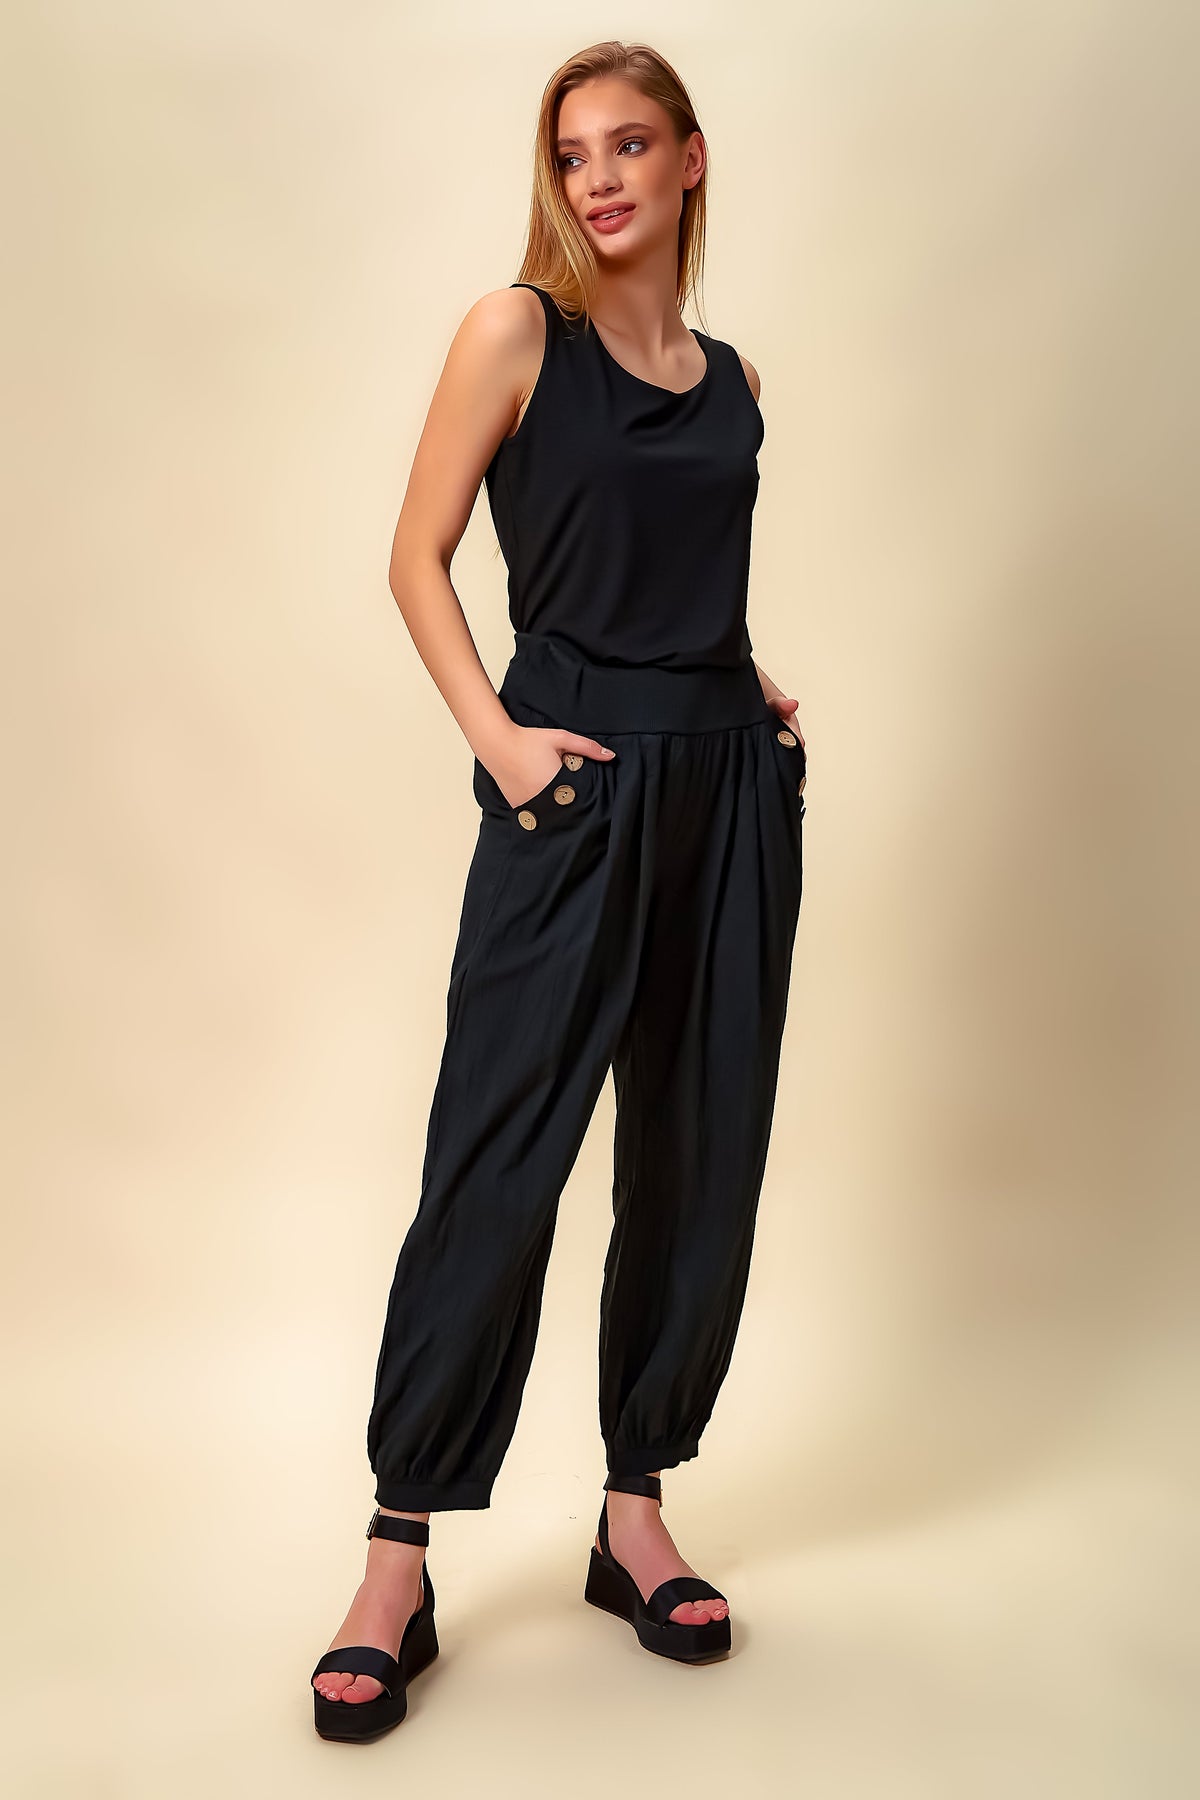 Relaxed Fit Casual Women Trousers and Pants